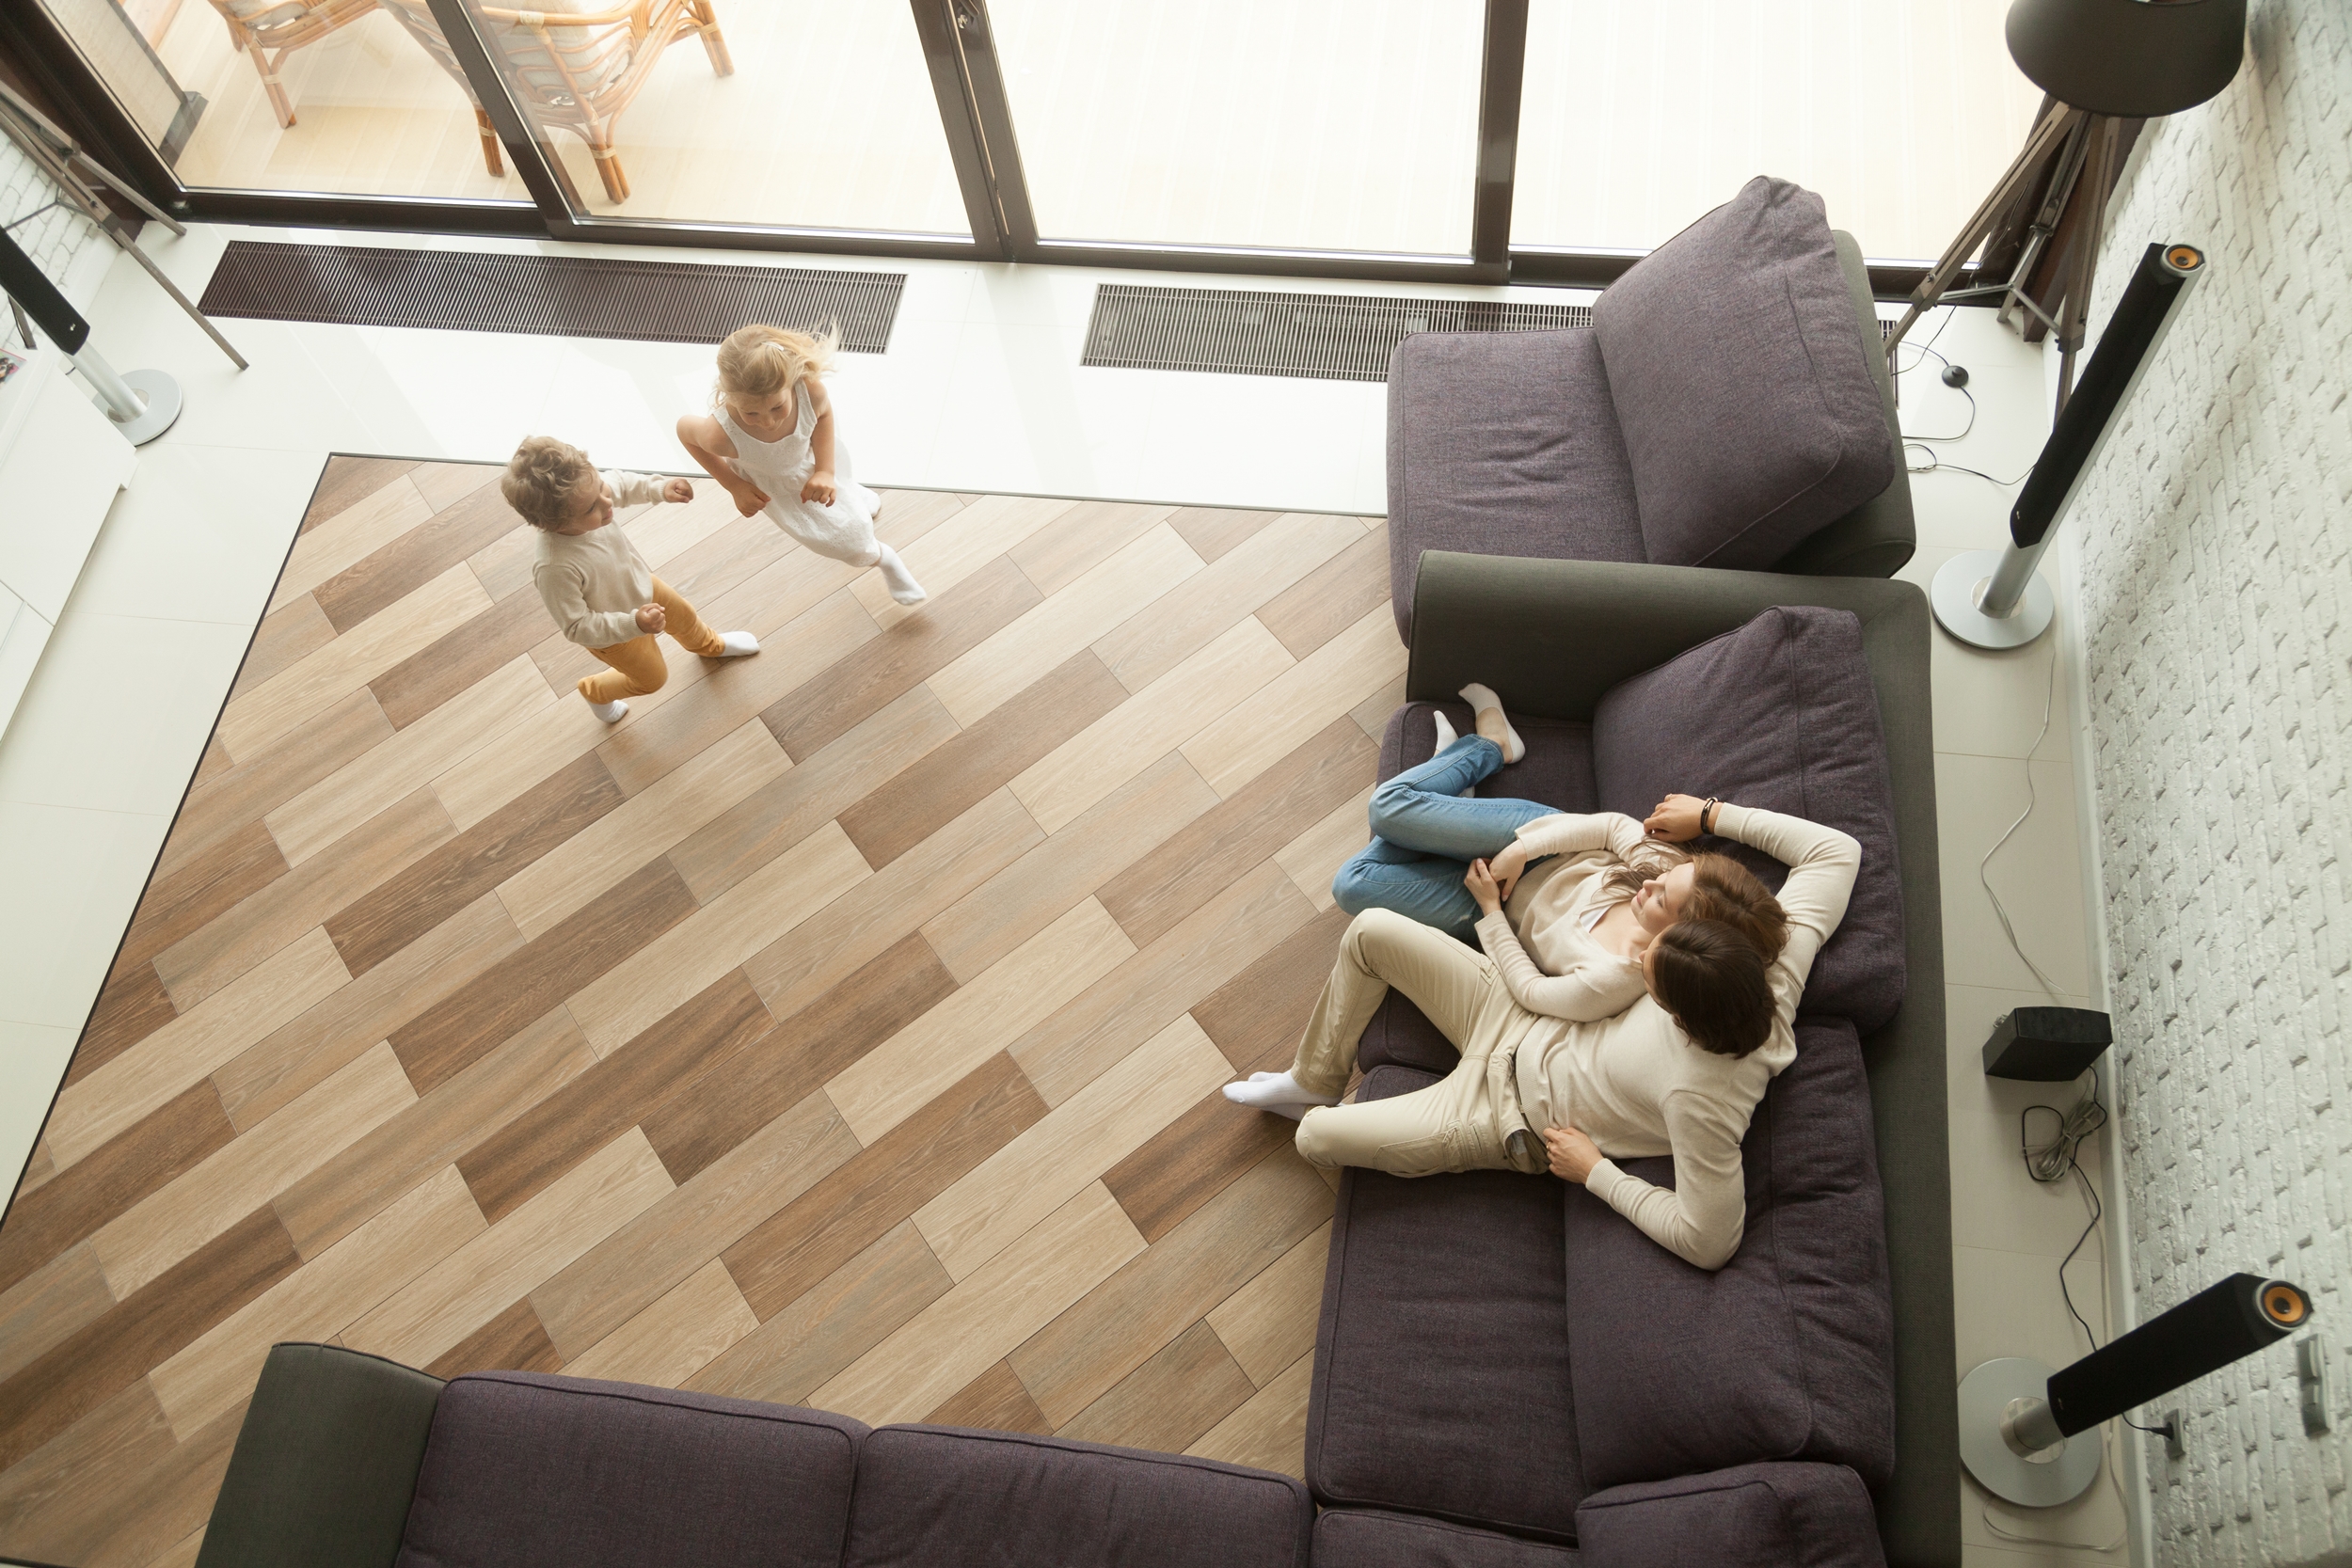 A neat and clean living room with wood patterned flooring material, in a home with a happy couple on a sofa and two young children playing and running around